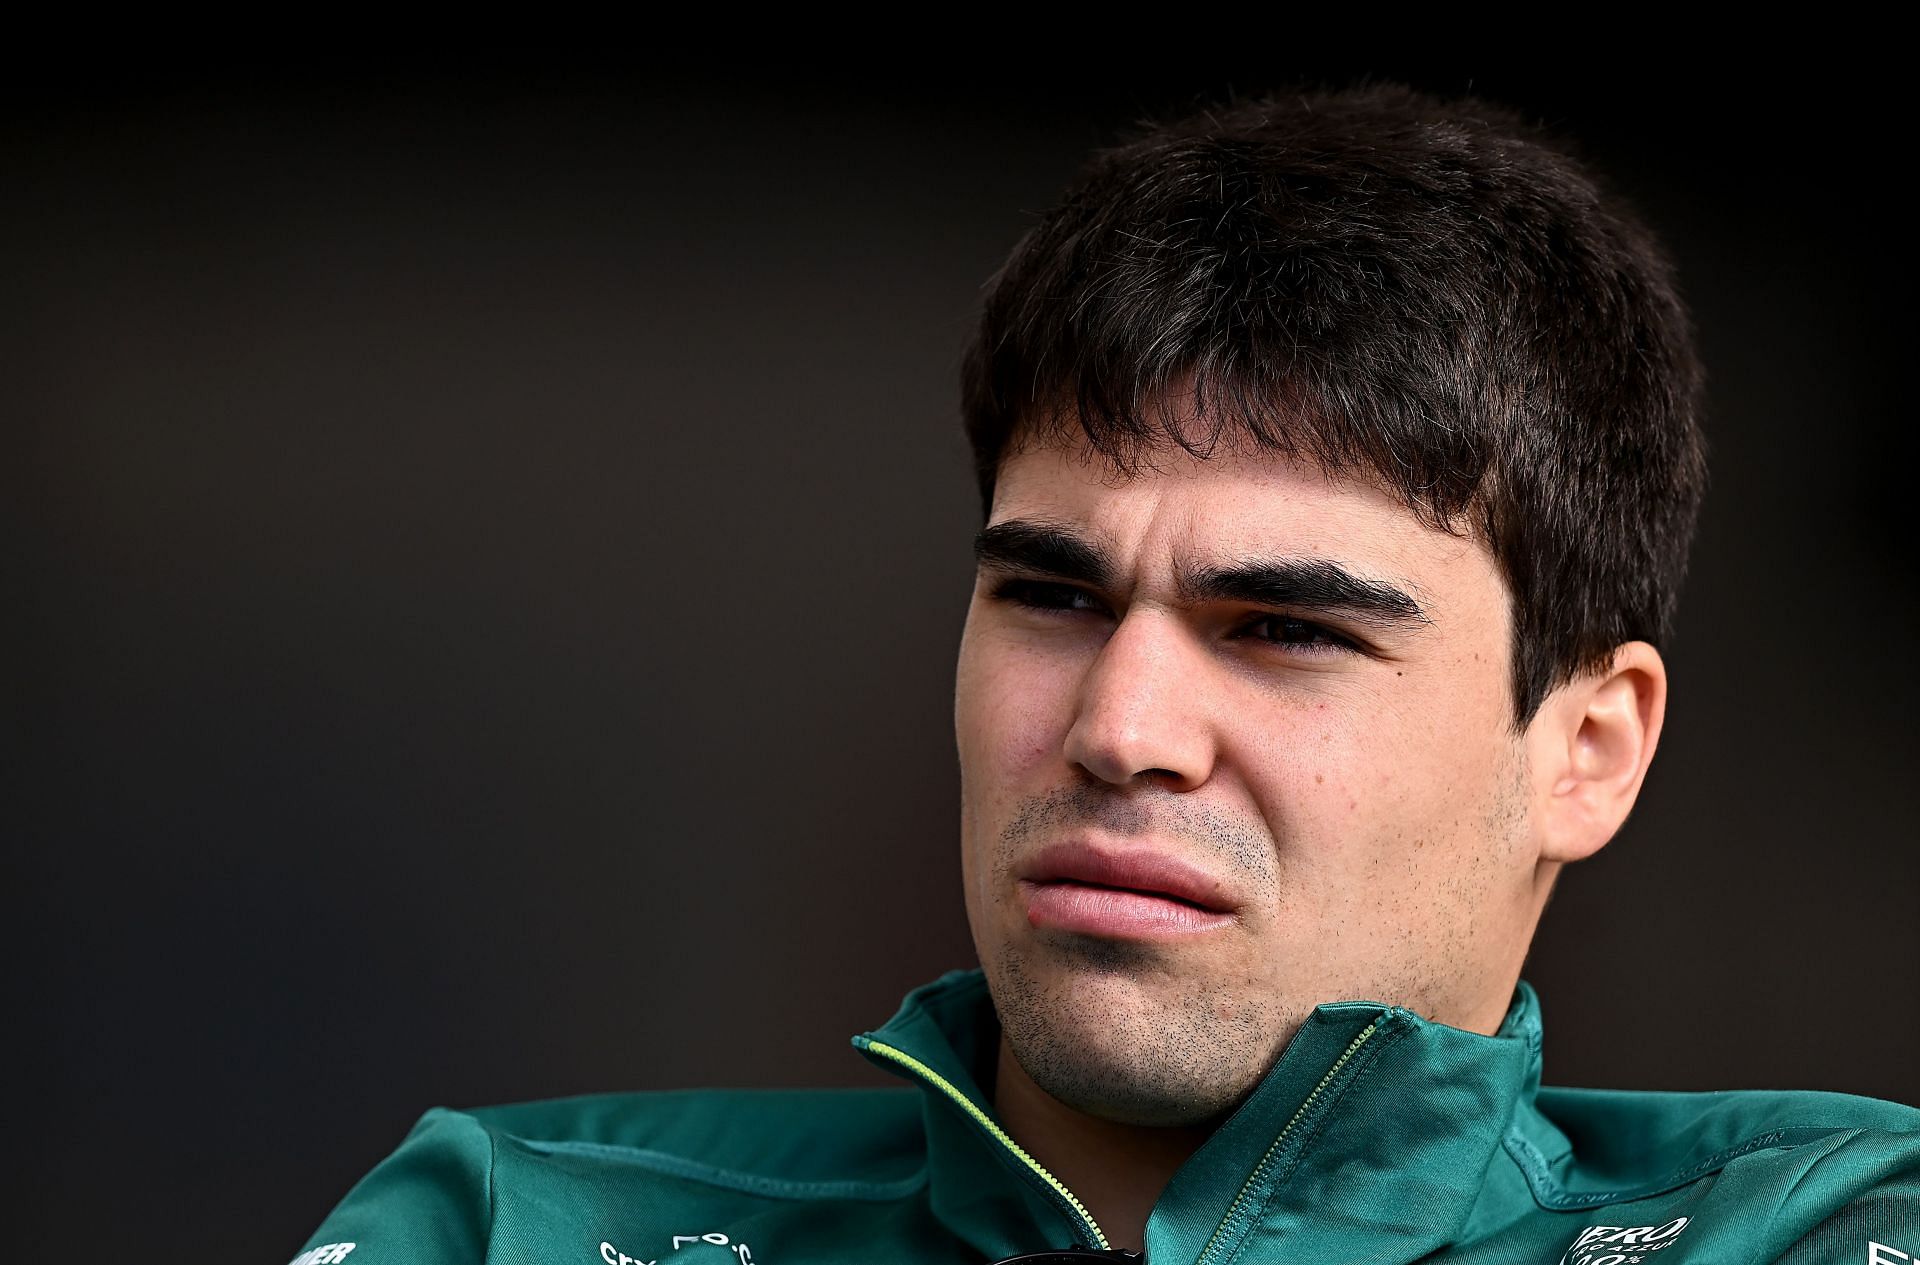 Lance Stroll was not entirely happy with the penalty given to him for the incident with Valtteri Bottas